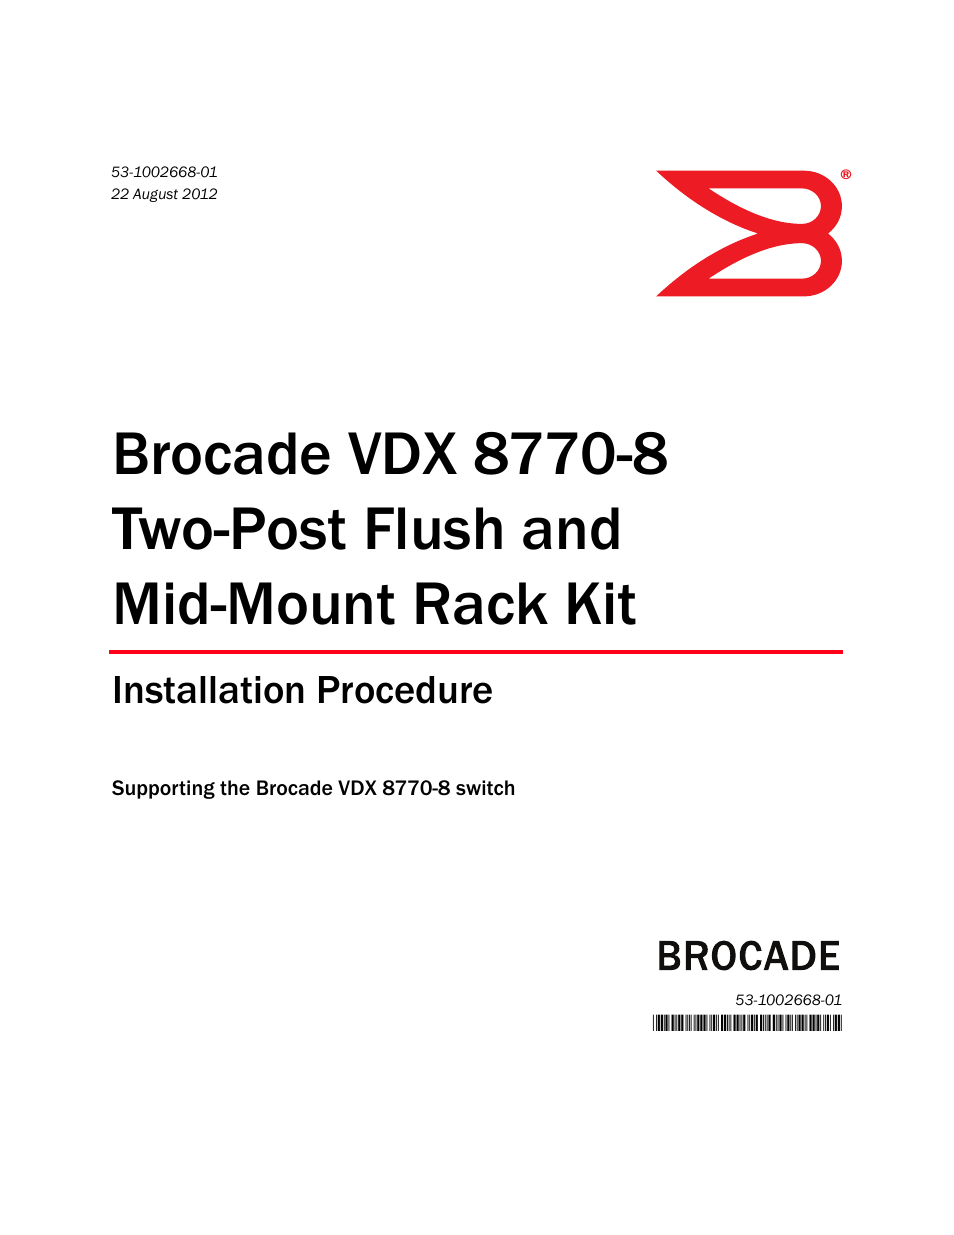 VDX 8770-8 Two-Post Flush and Mid-Mount Rack Kit Installation Procedure